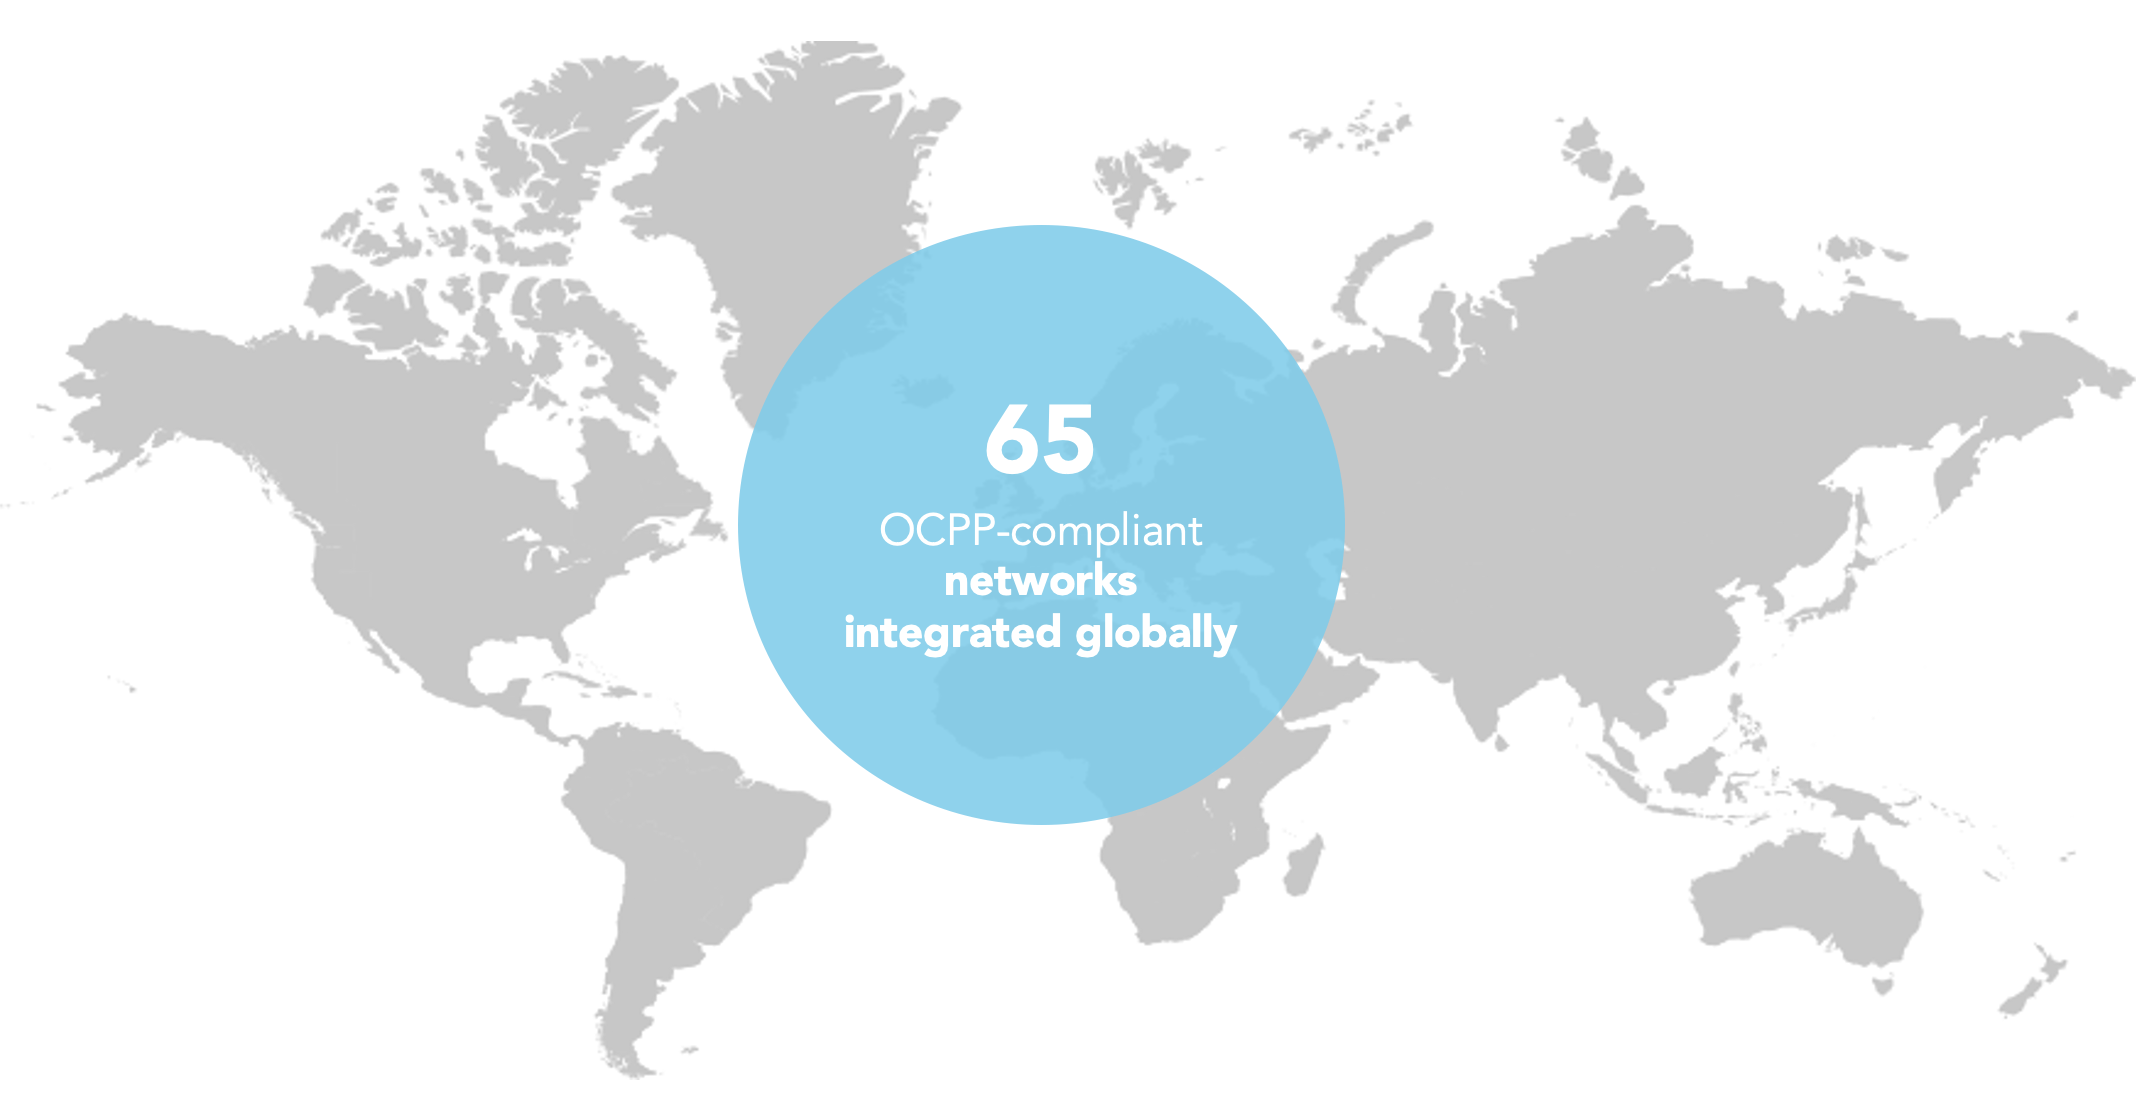 A global map showing that EVBox has 65 OCPP-compliant networks integrated globally